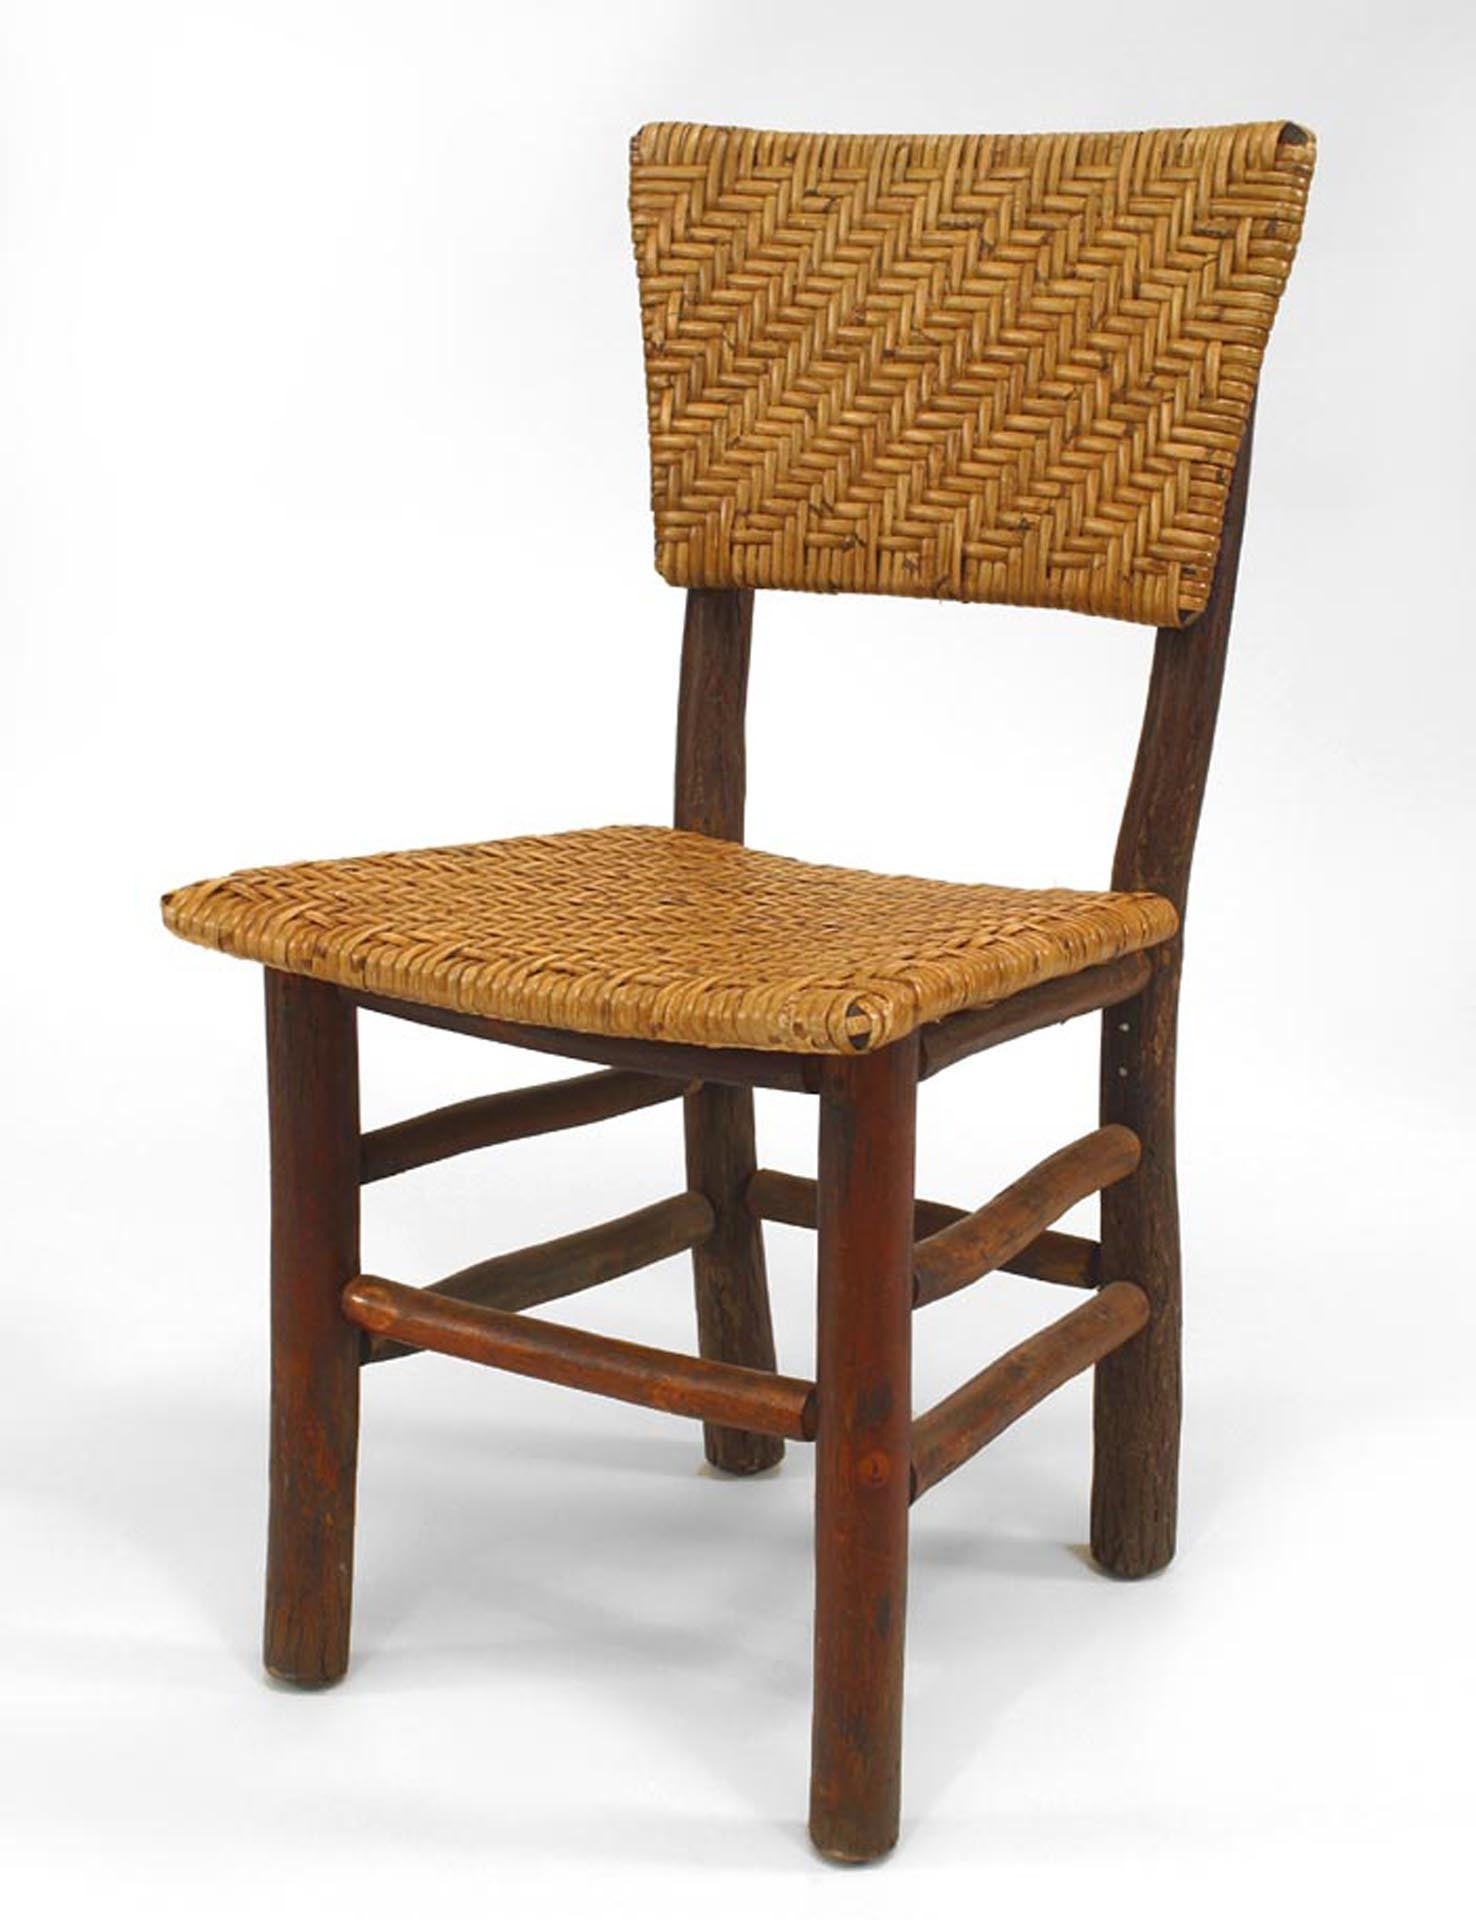 Set of 6 Rustic Old Hickory (Circa 1940) side chairs with woven rattan seat & back with flaired design back & stretcher (branded Martinsville, Ind.) (Russel Wright design)
